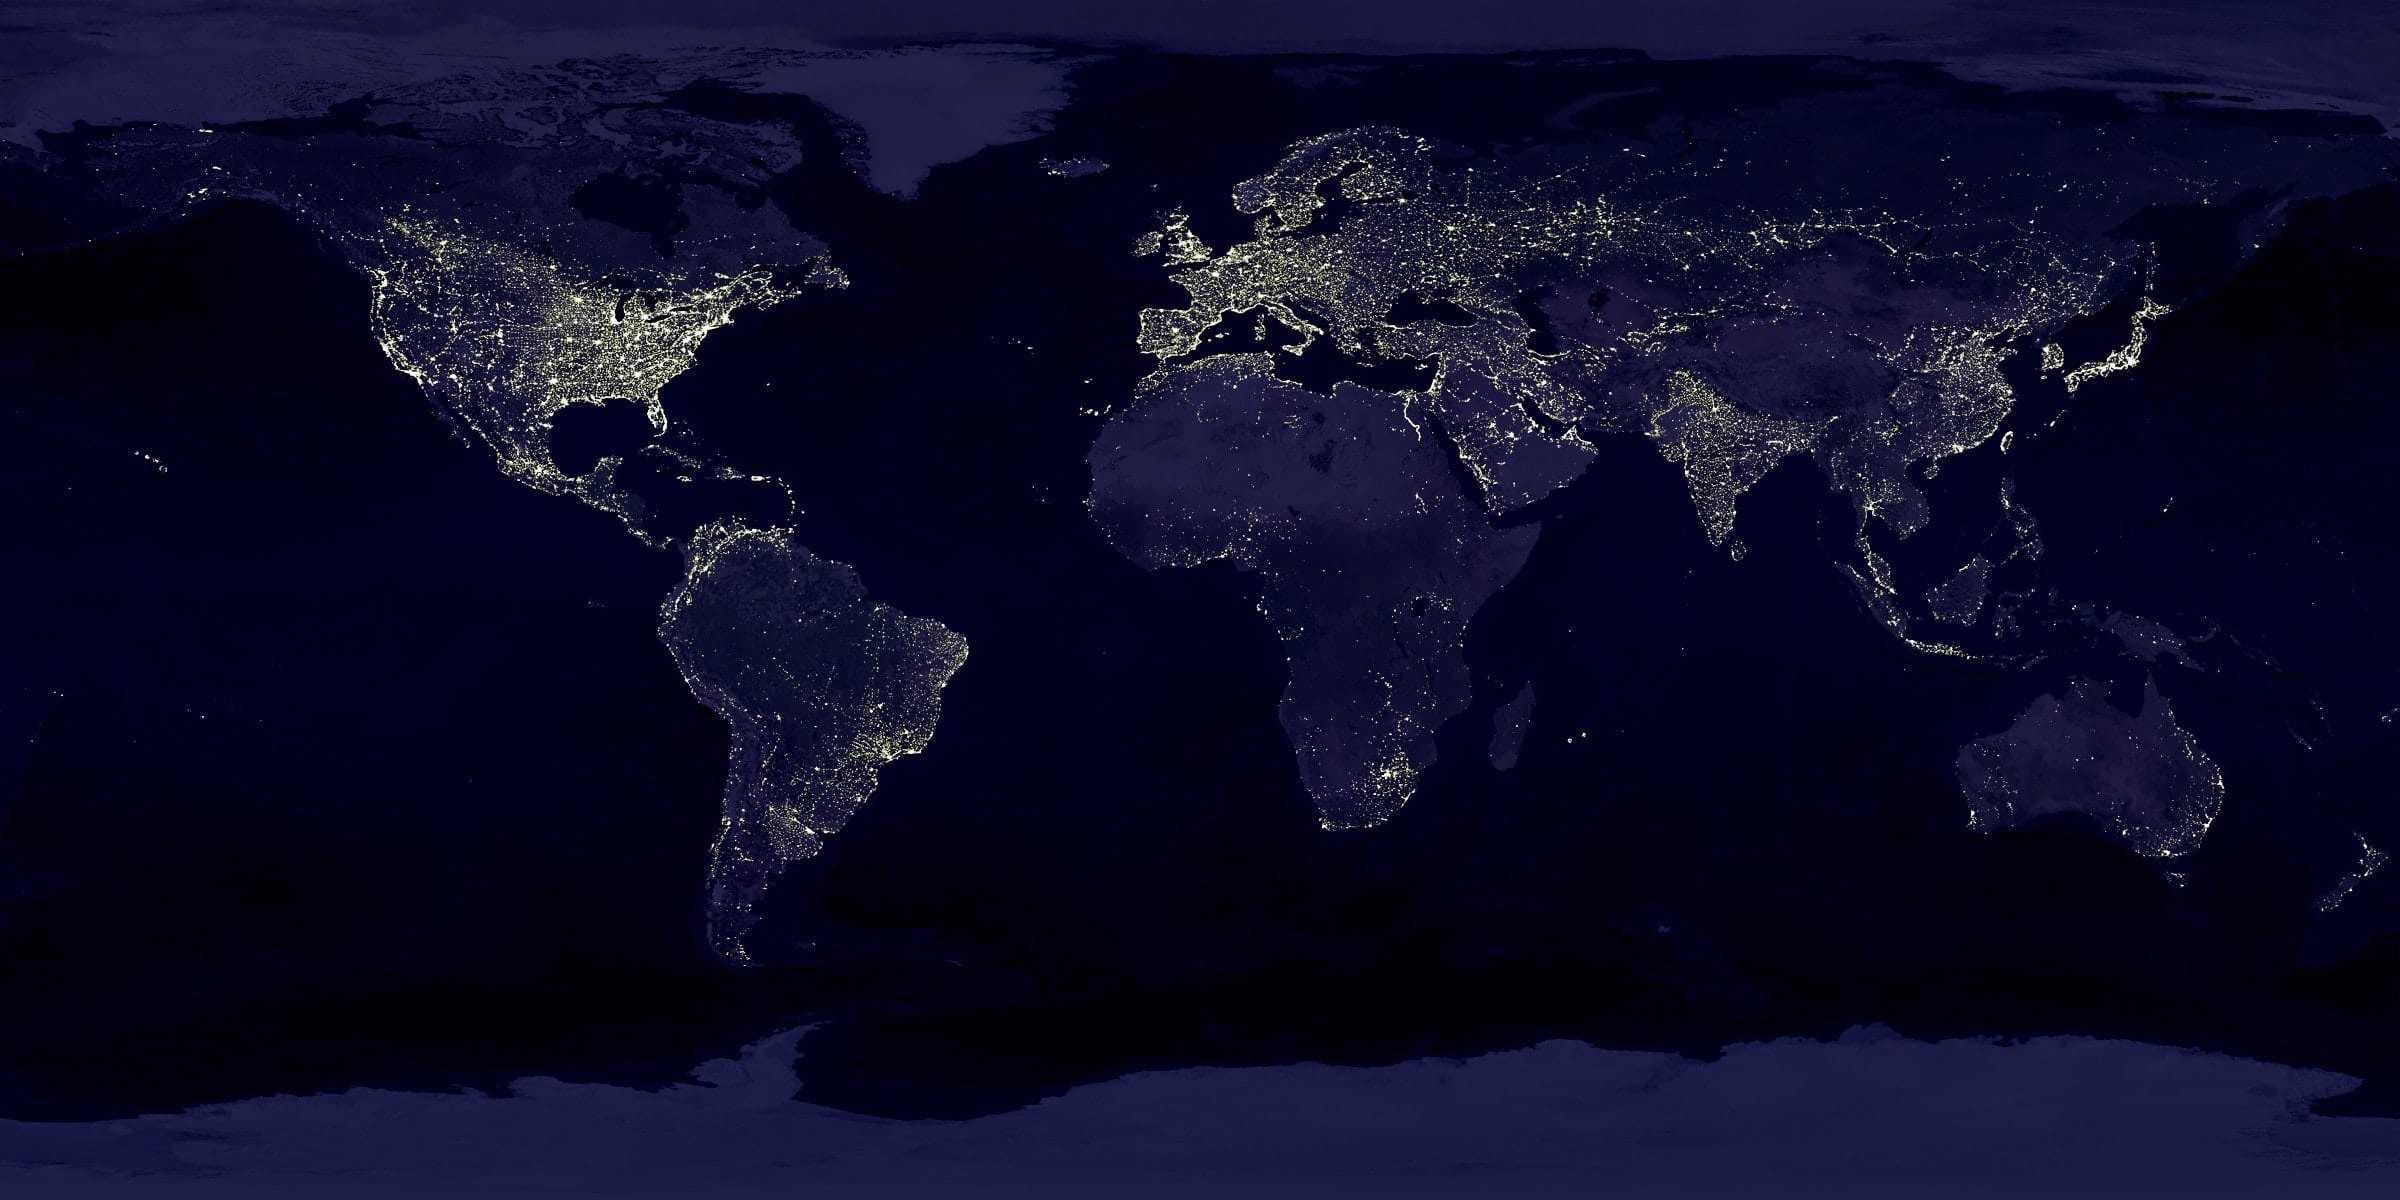 image of the earth at night as a rectangle